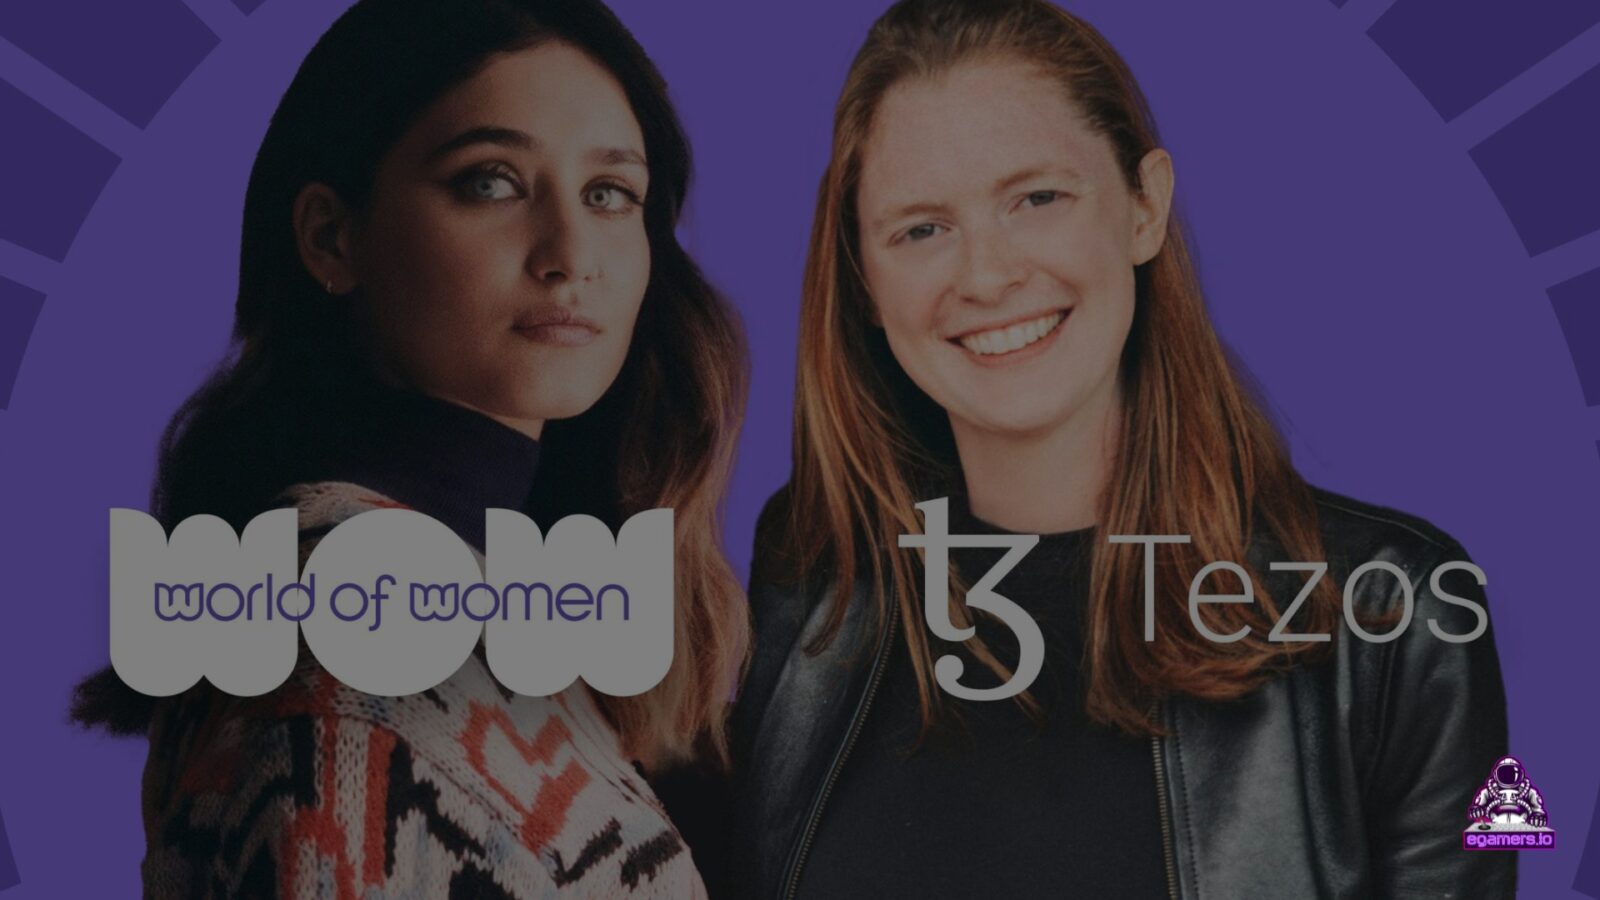 World of Women Collaborates with Tezos to Boost Female Inclusion in Web3